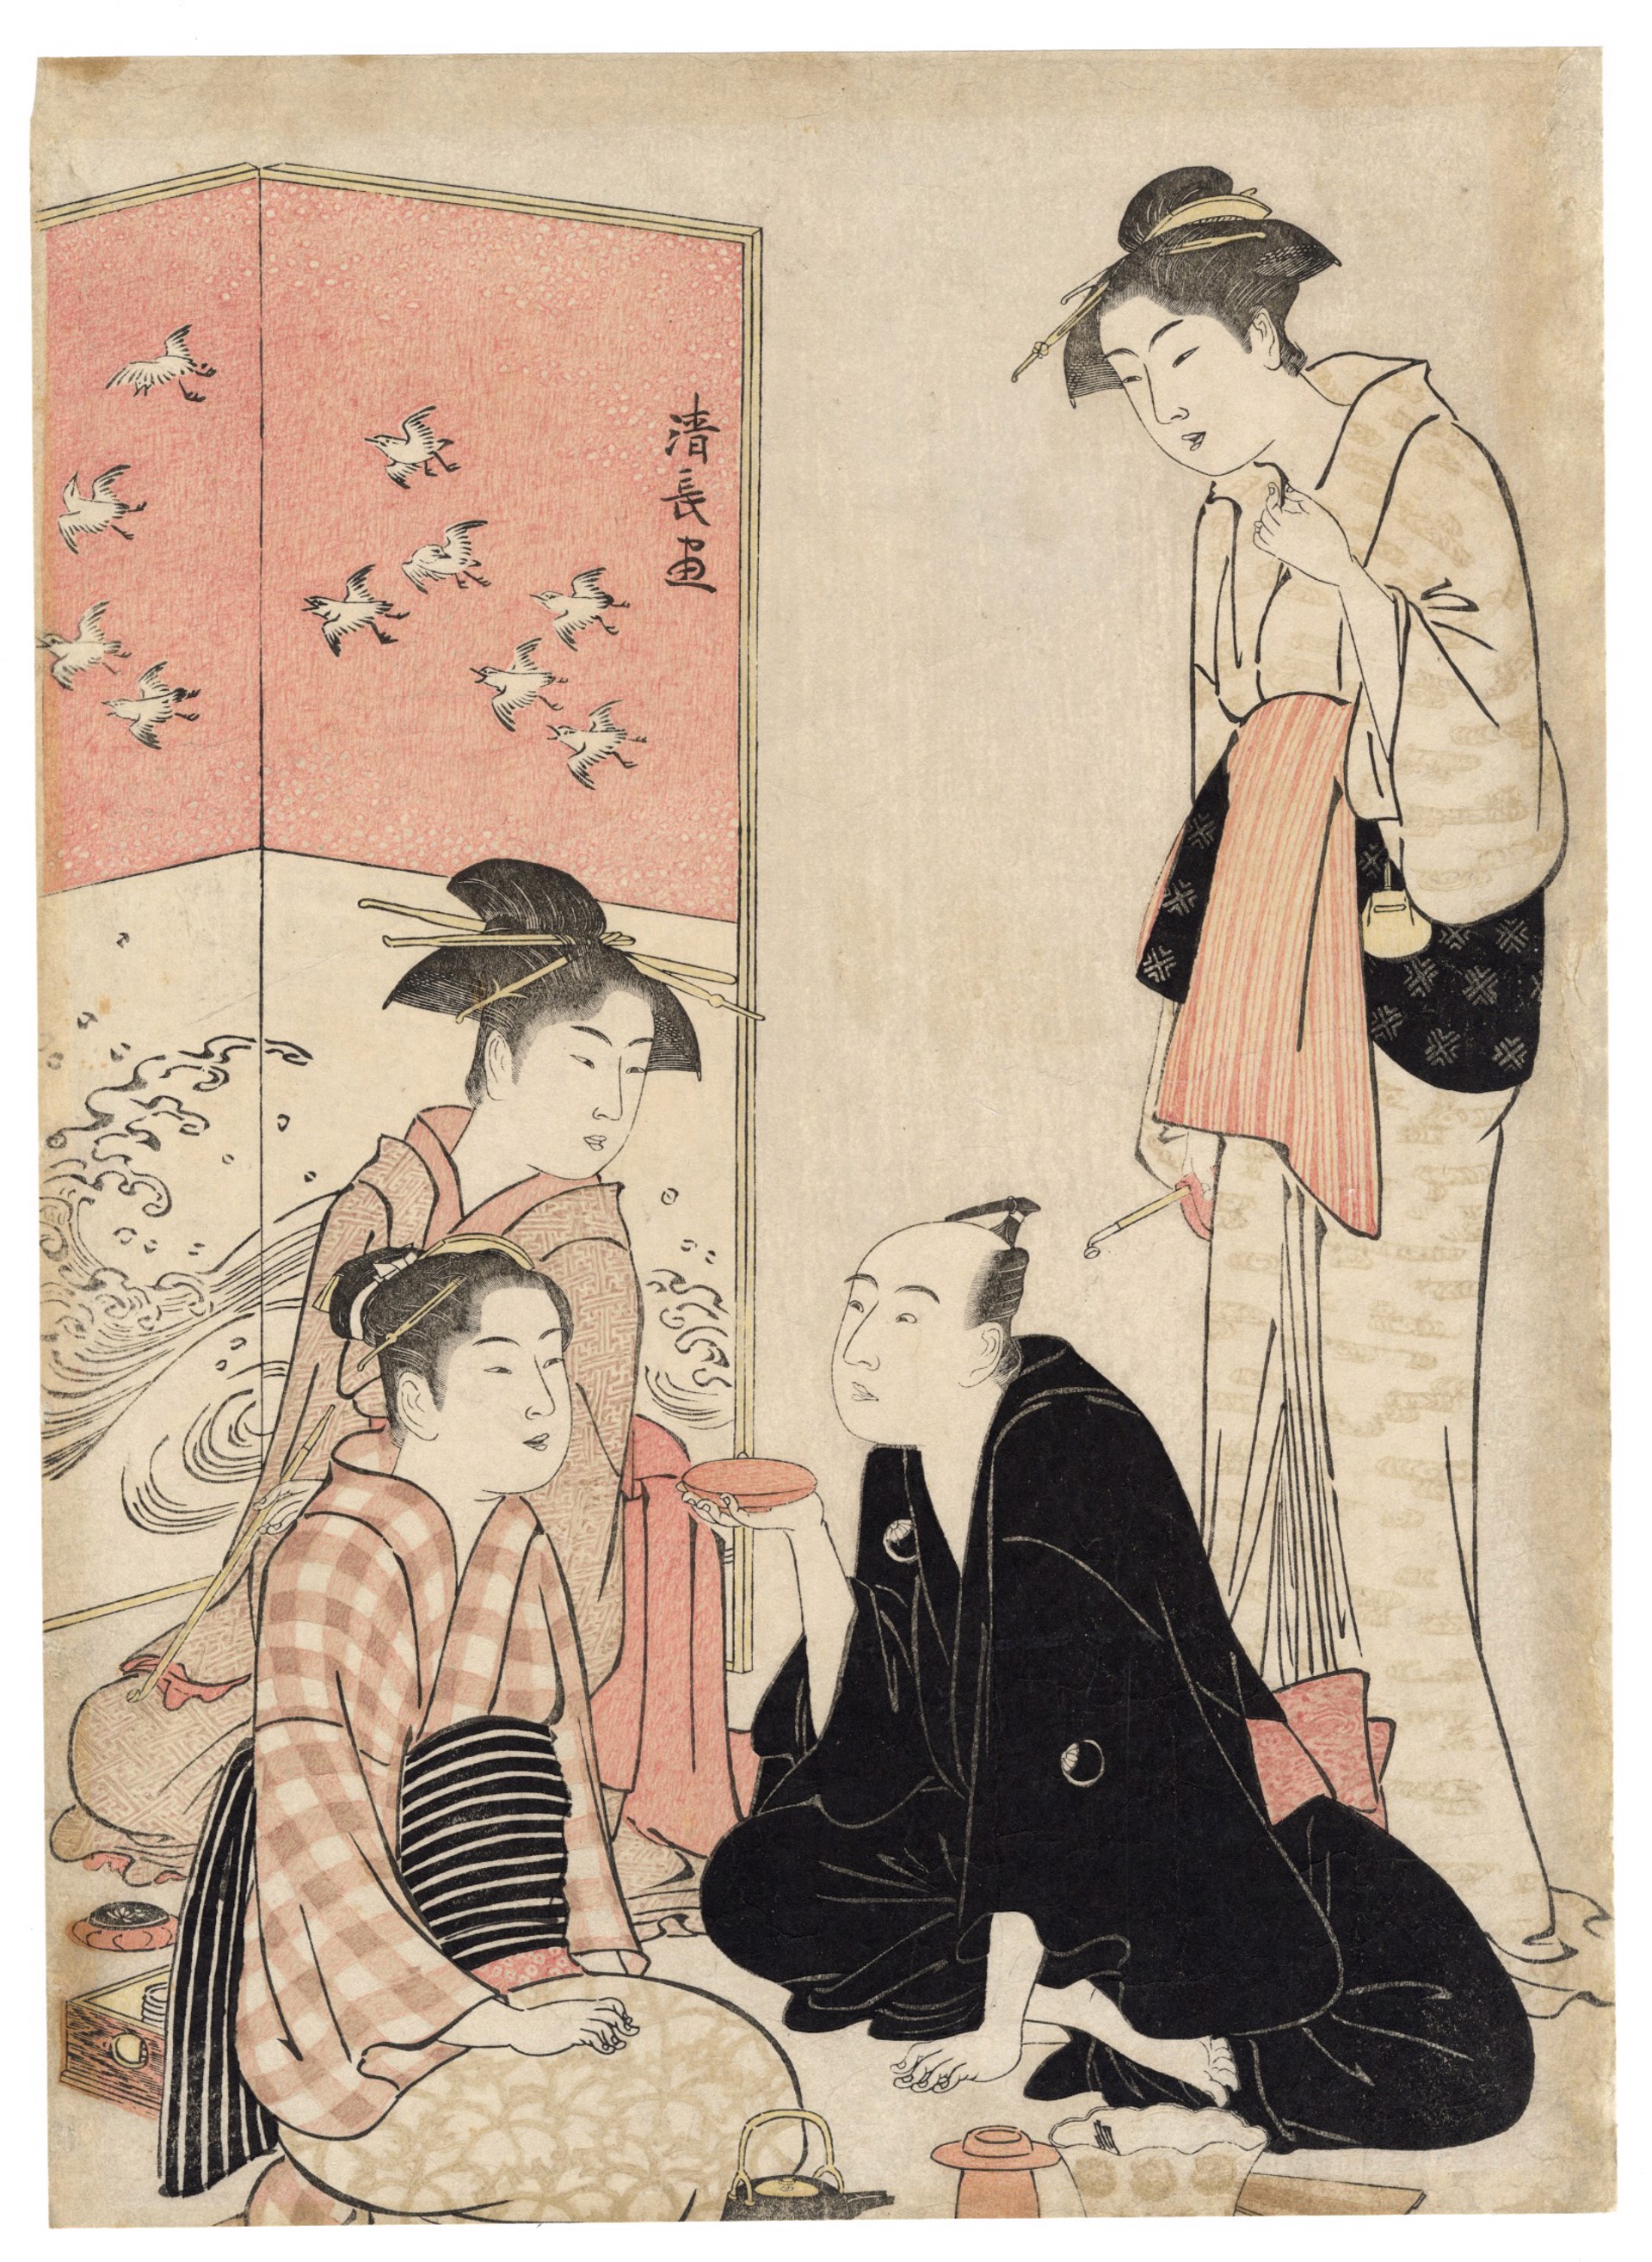 The Actor Sawamura sojuro III Relaxing in Private Life with Courtesans by Kiyonaga